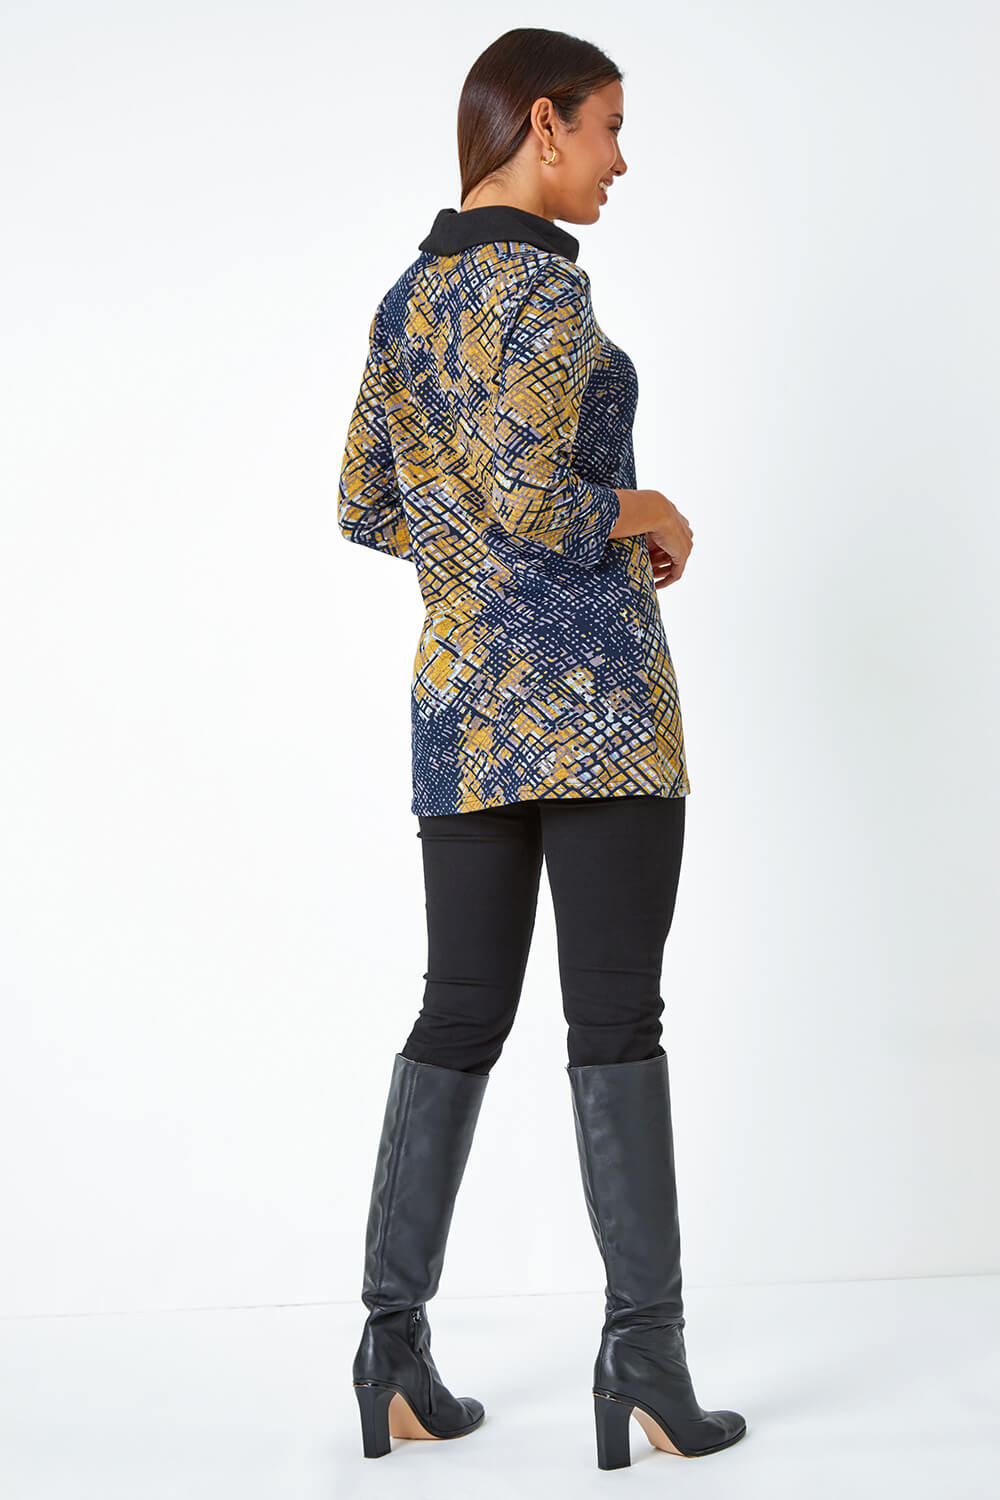 Ochre Abstract Print Cowl Neck Stretch Top, Image 3 of 5